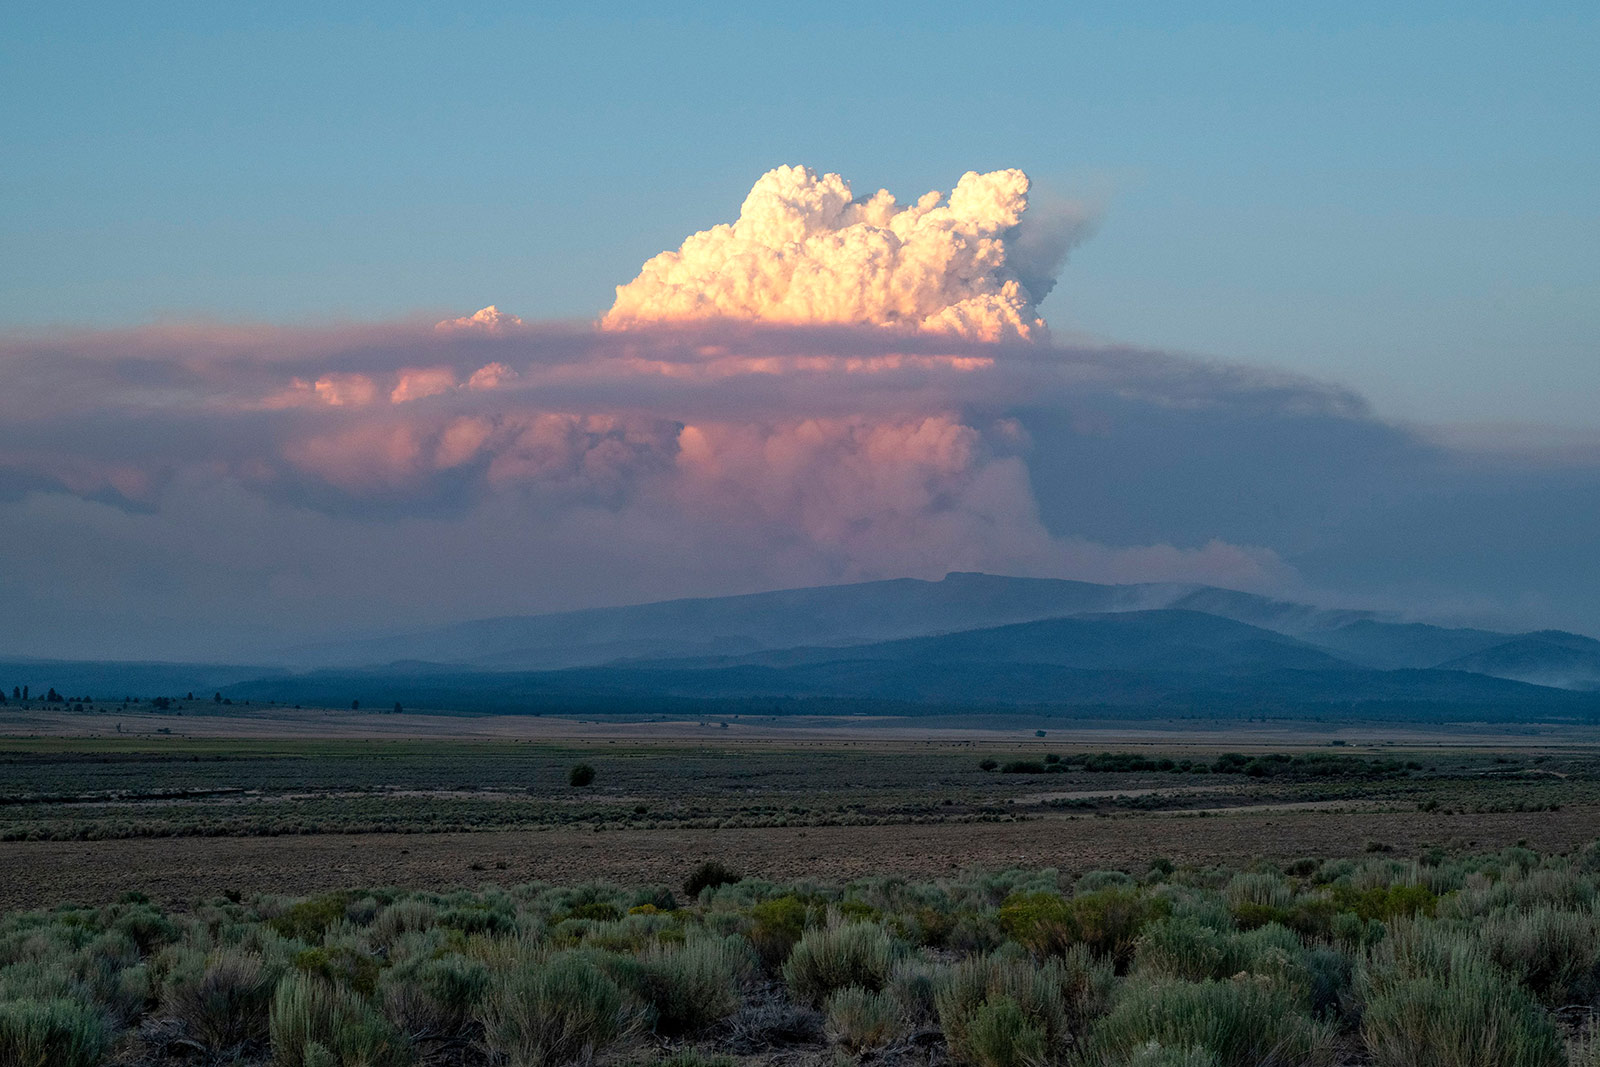 A pyrocumulus cloud from the Bootleg Fire drifts into the air near Bly, Oregon